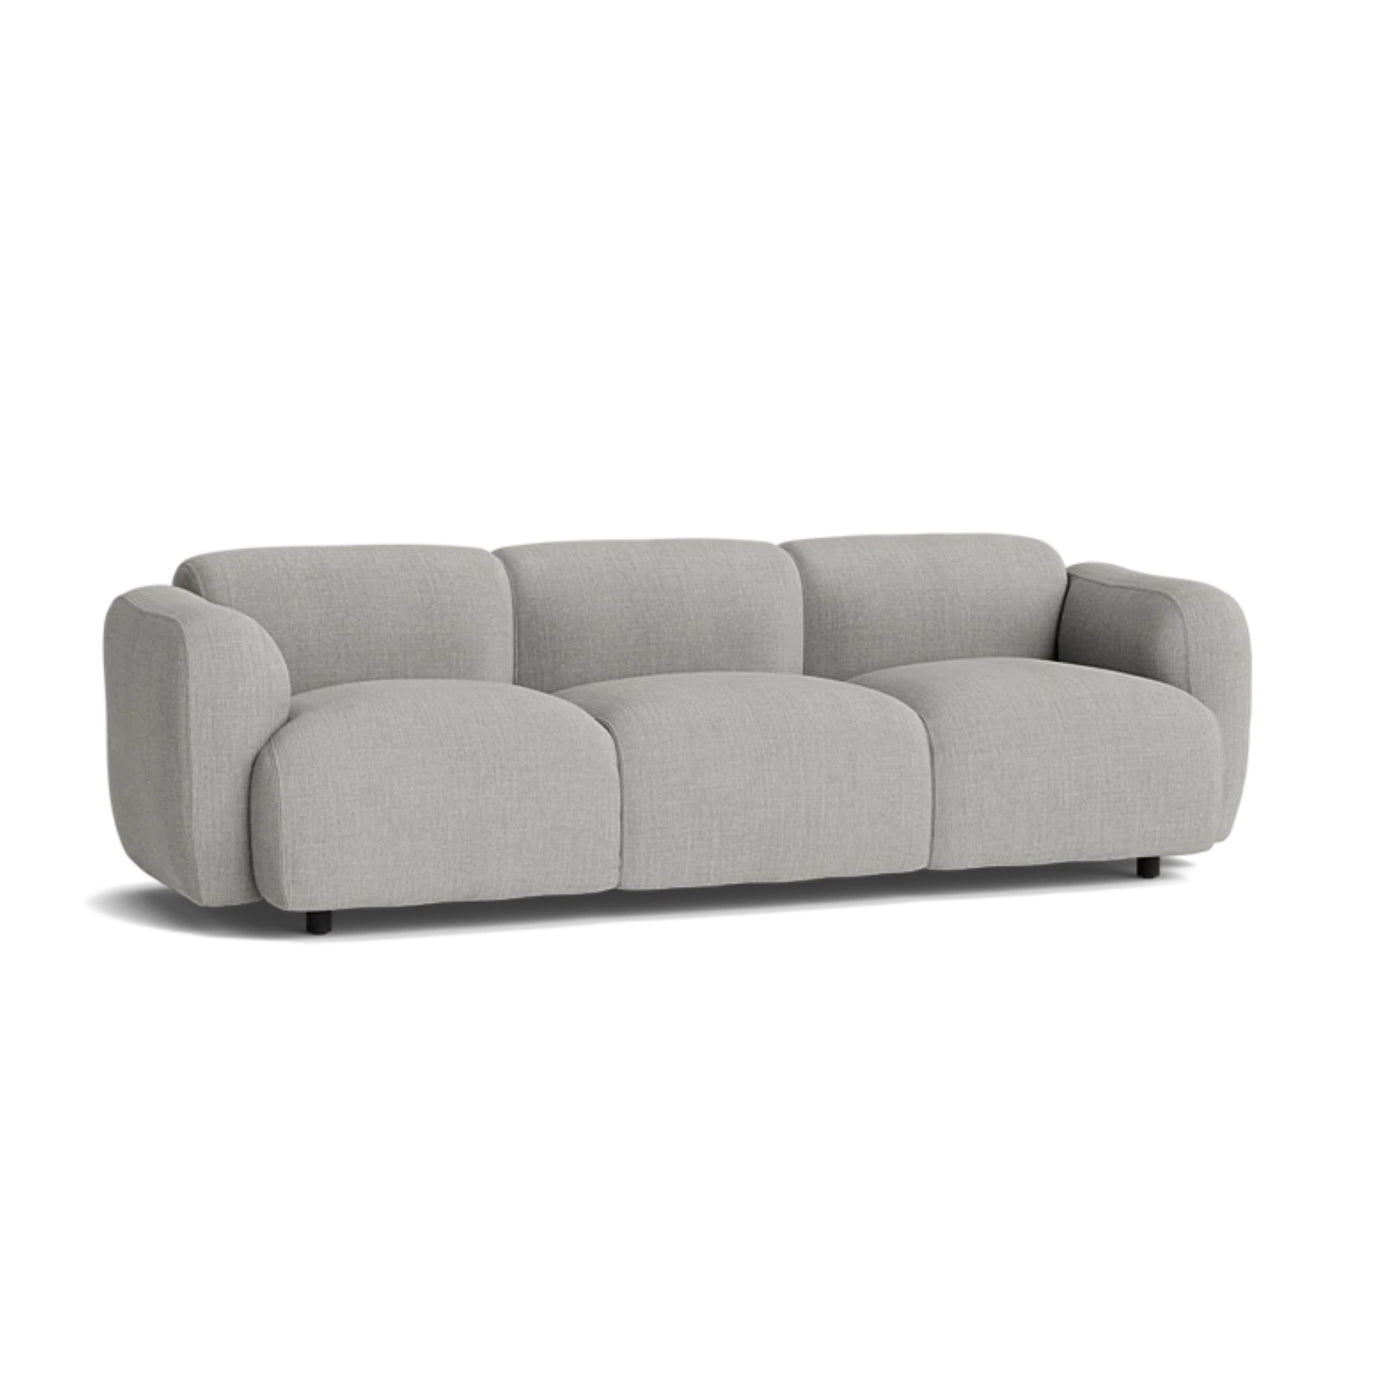 Normann Copenhagen Swell 3 Seater Sofa at someday designs. #colour_remix-133